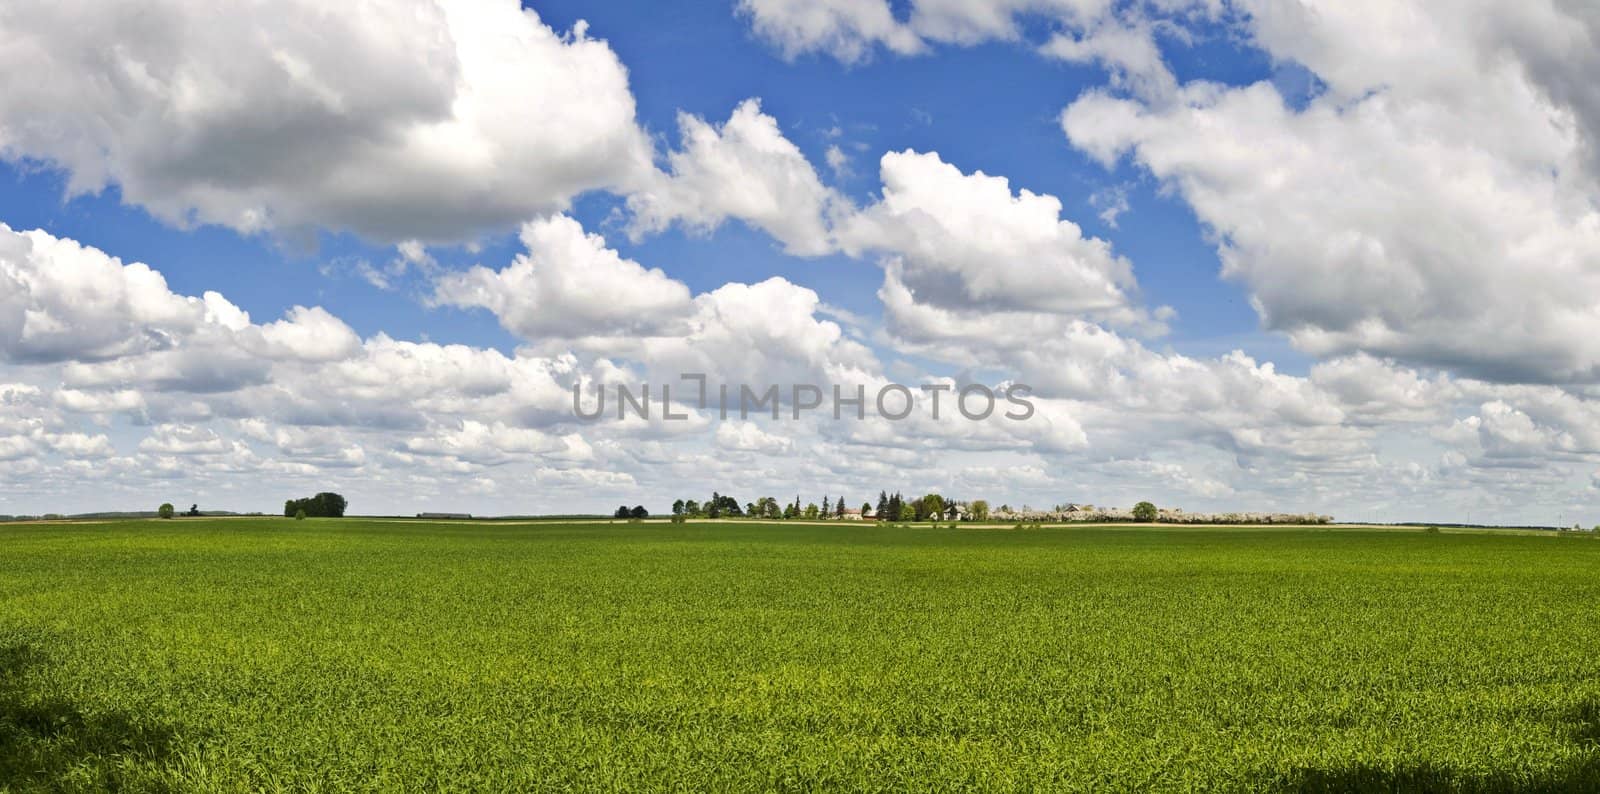 Landscape BIG panorama - field, trees and blue cloudy sky (ideal for background or wallpaper)